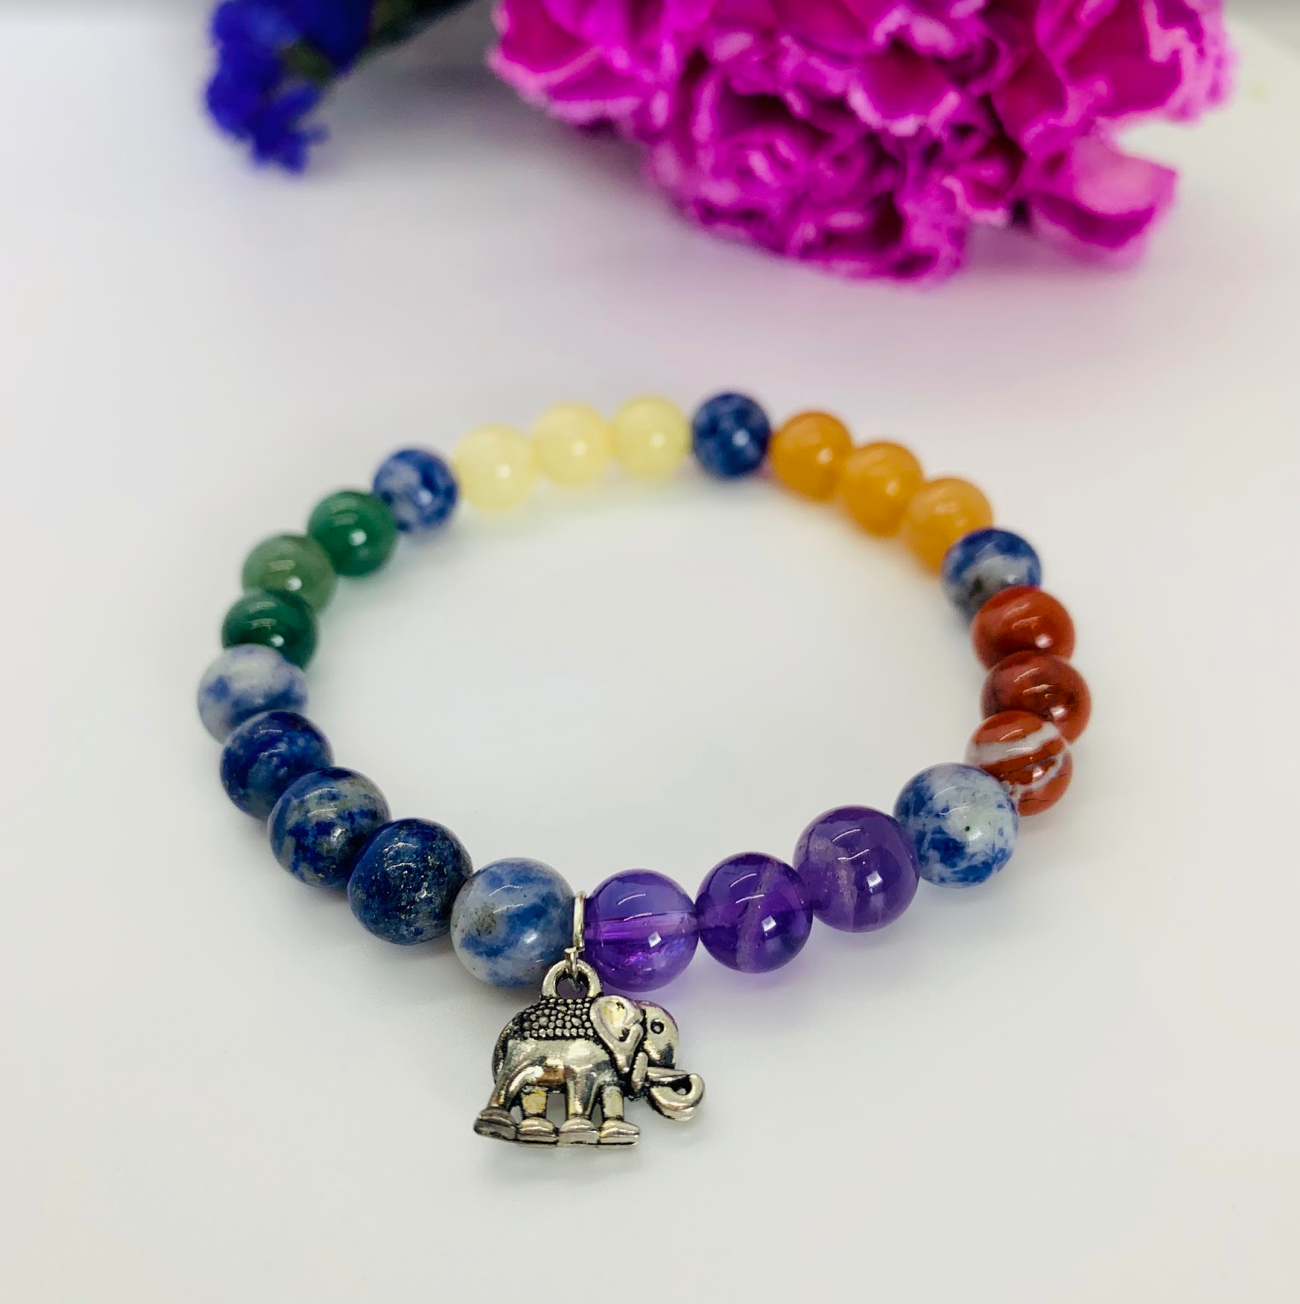 7 Chakra Bracelet with elephant charm – Tranquil Wellbeing